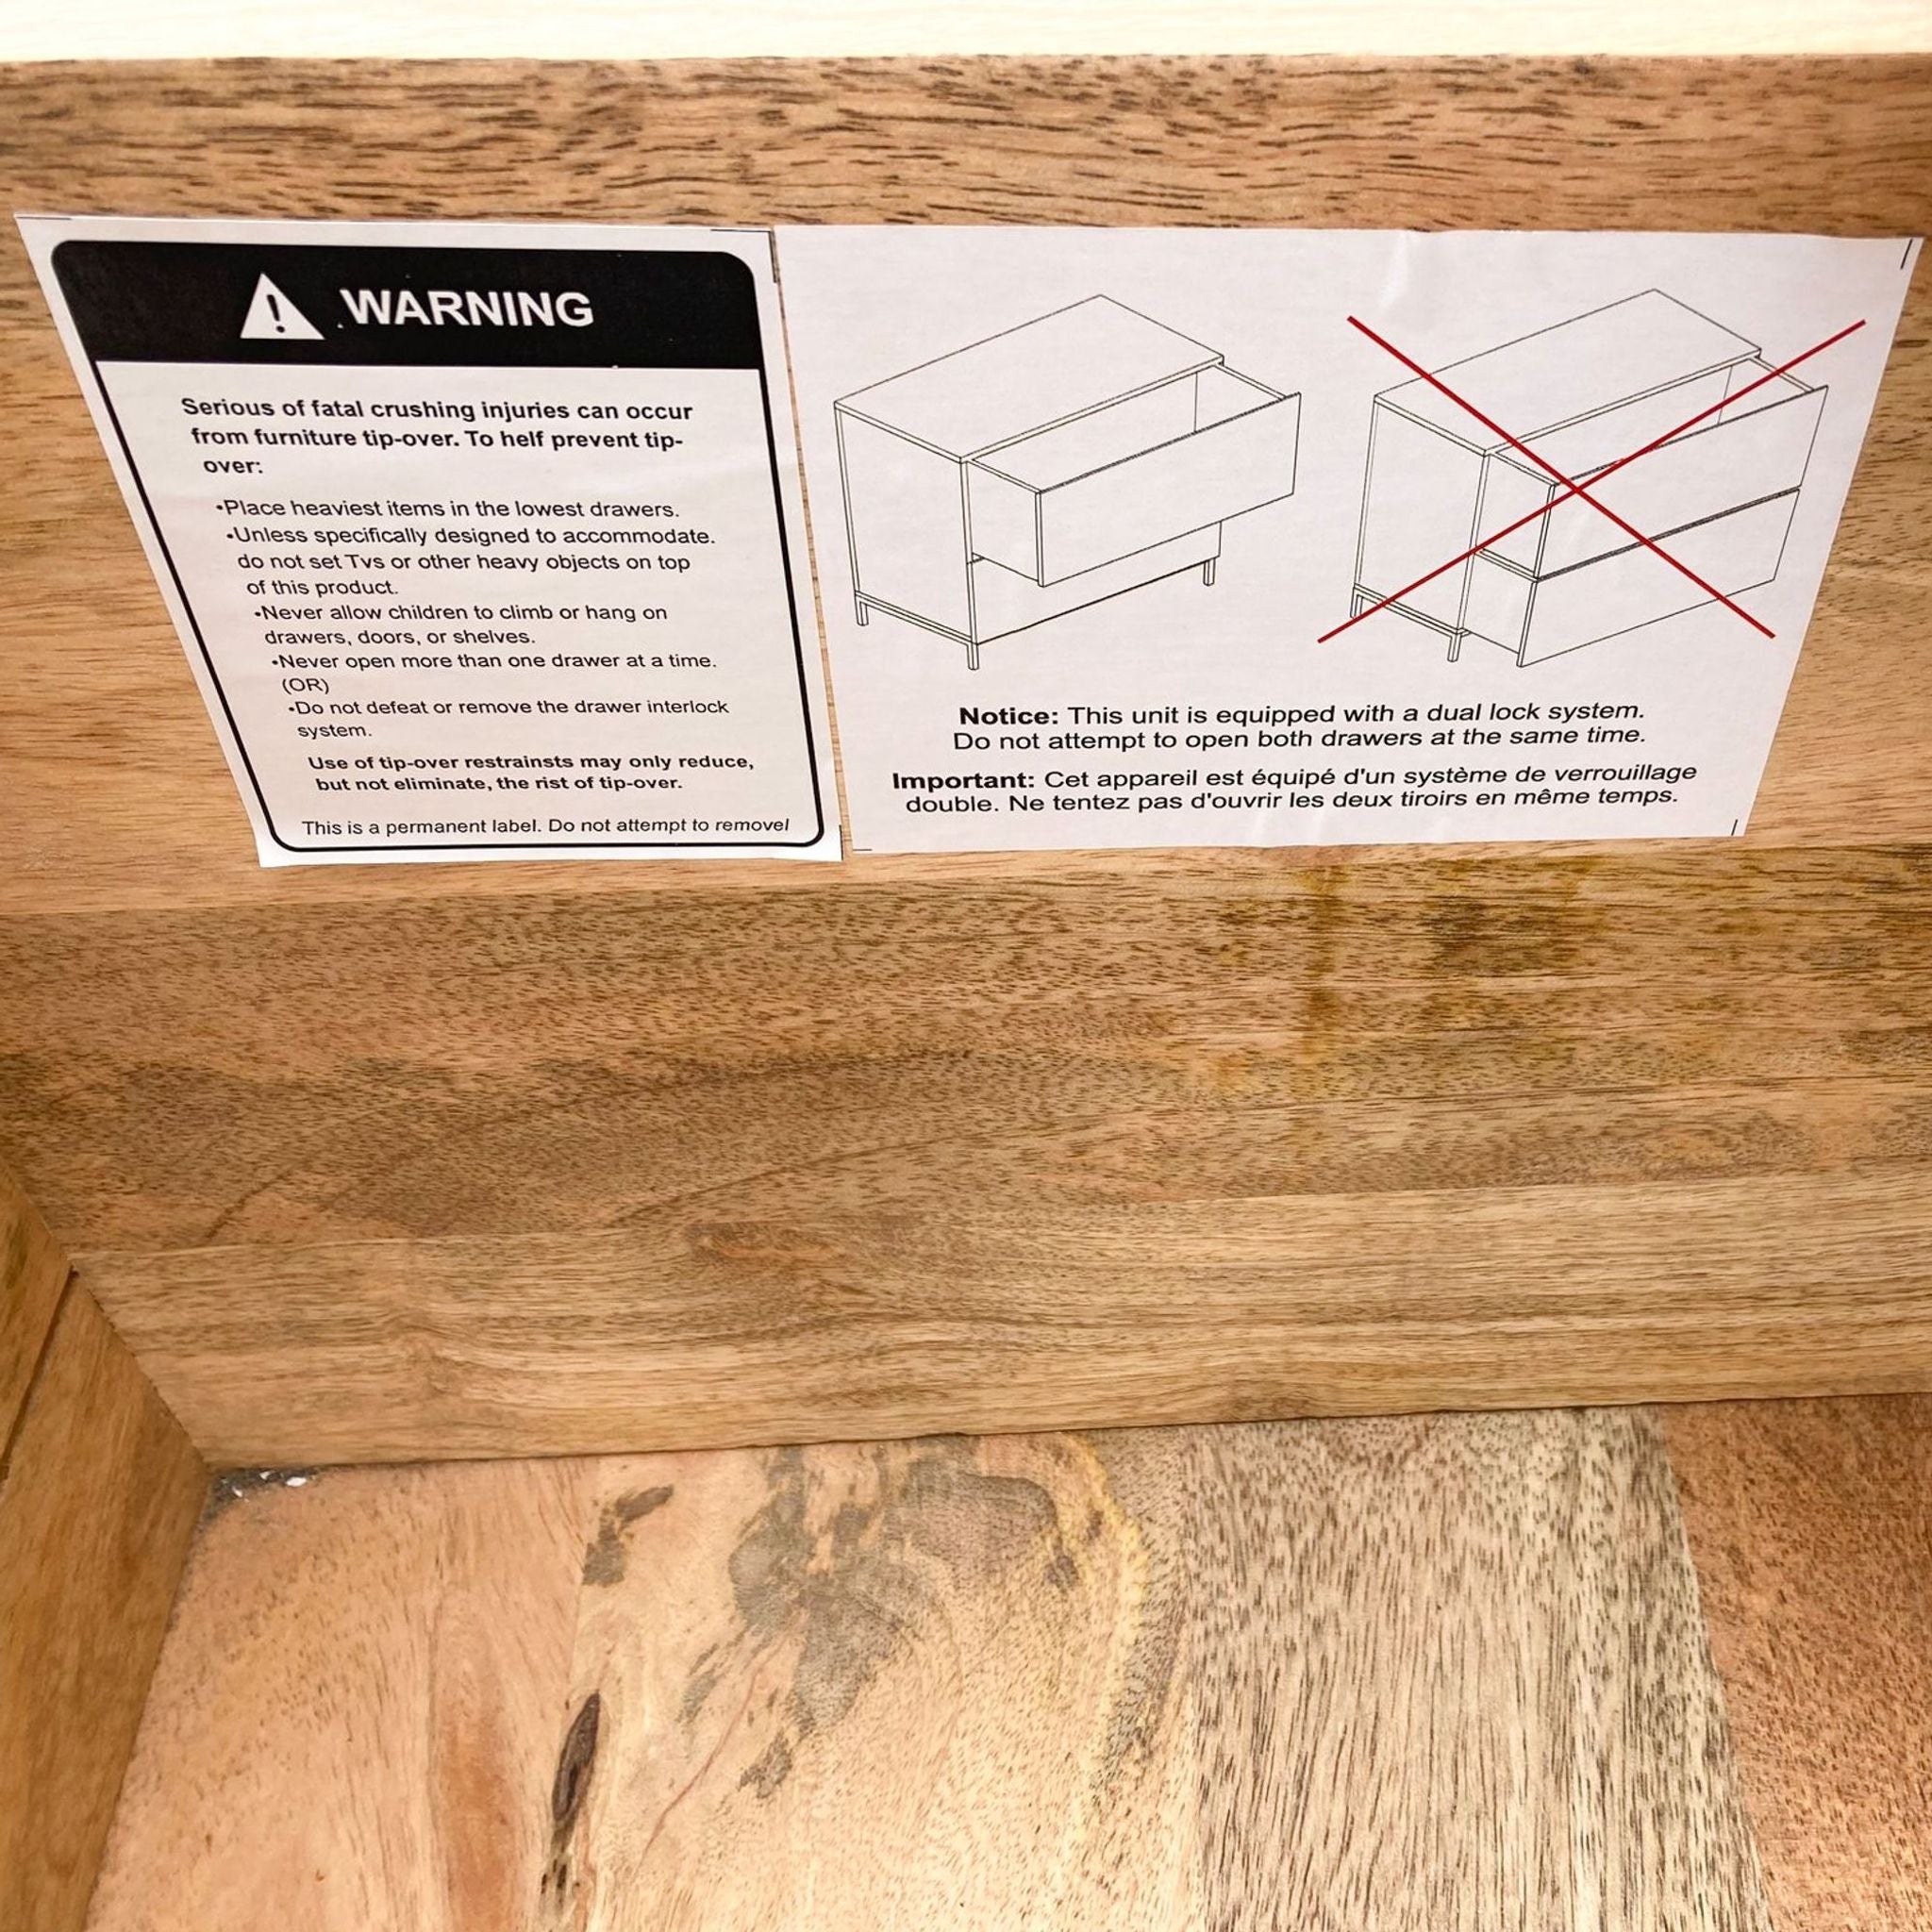 3. "Safety label inside the West Elm filing cabinet warning against tipping and advising on the dual lock system."